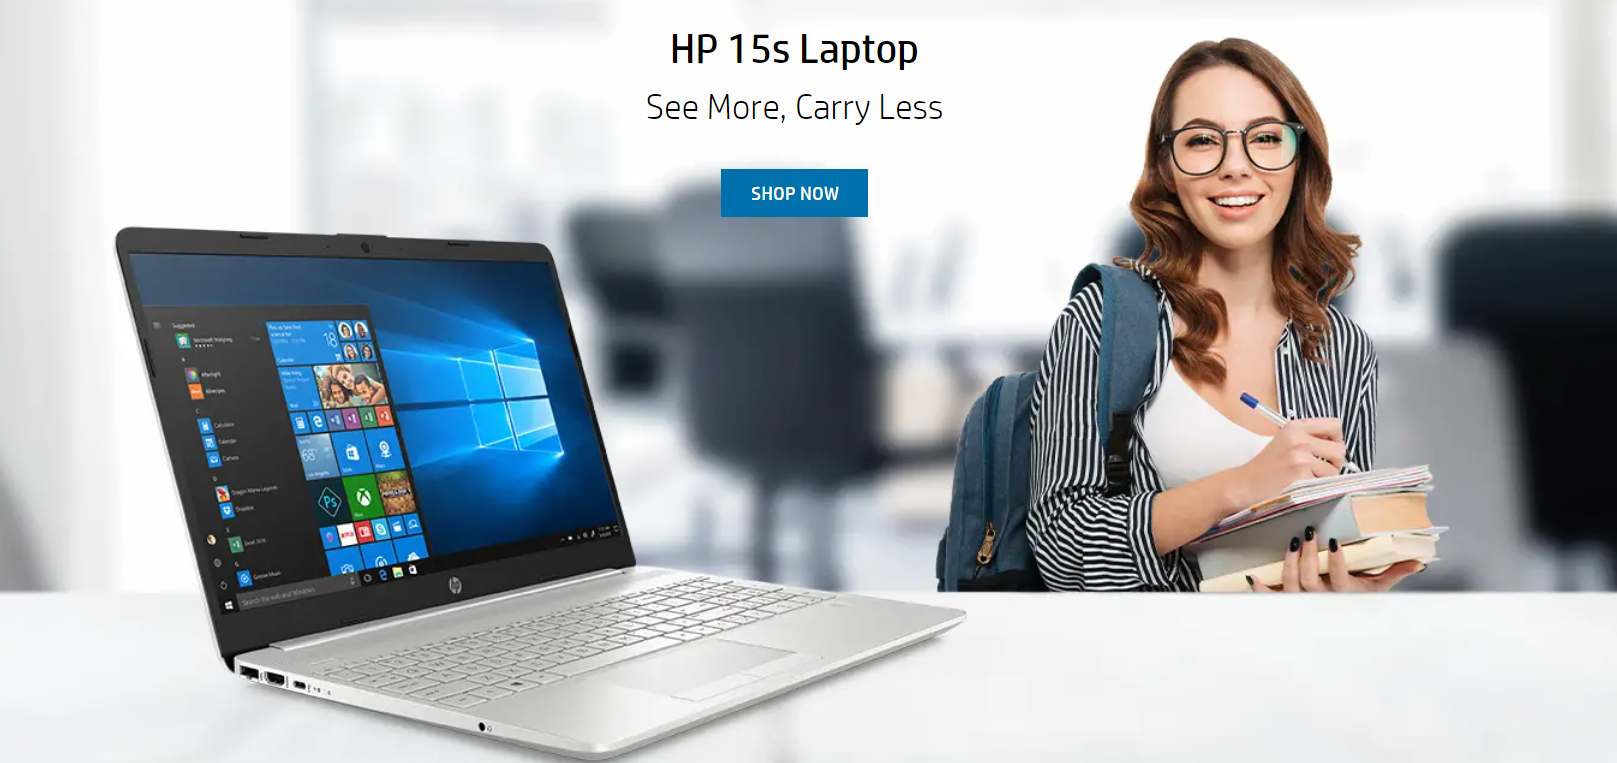 HP 15s Series: Everything You Need To Know